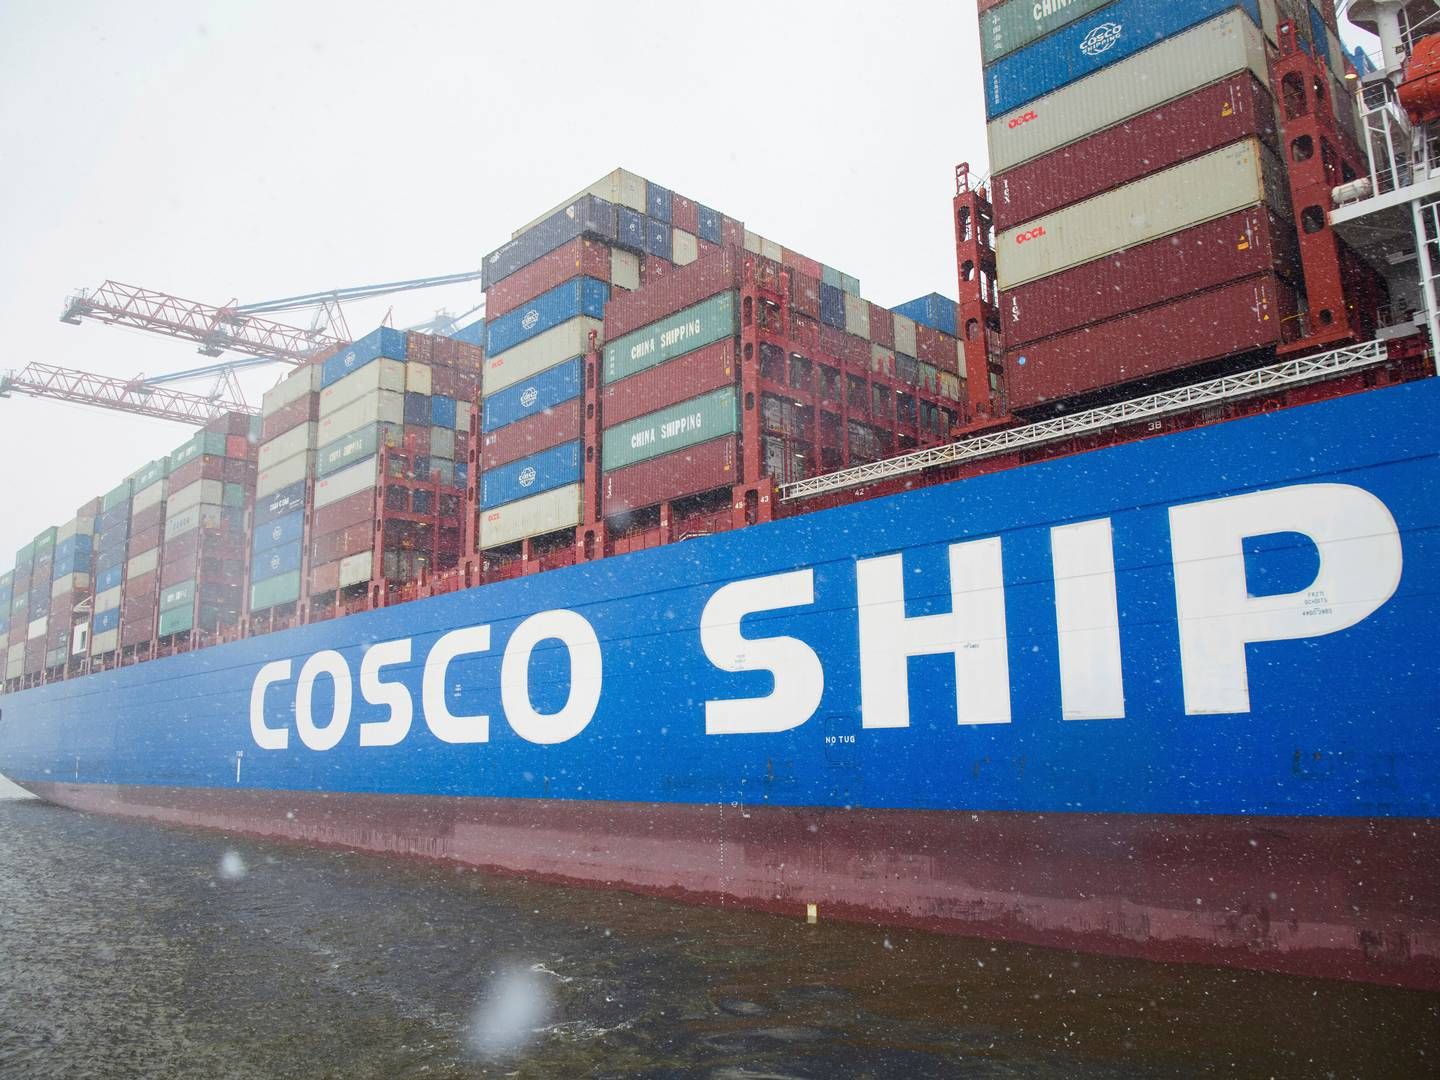 The EU ETS will affect around 4,000 ships sailing under the Asian flag. Owners include COSCO, Anglo Eastern Ship Management and HMM. | Photo: Gregor Fischer/AP/Ritzau Scanpix